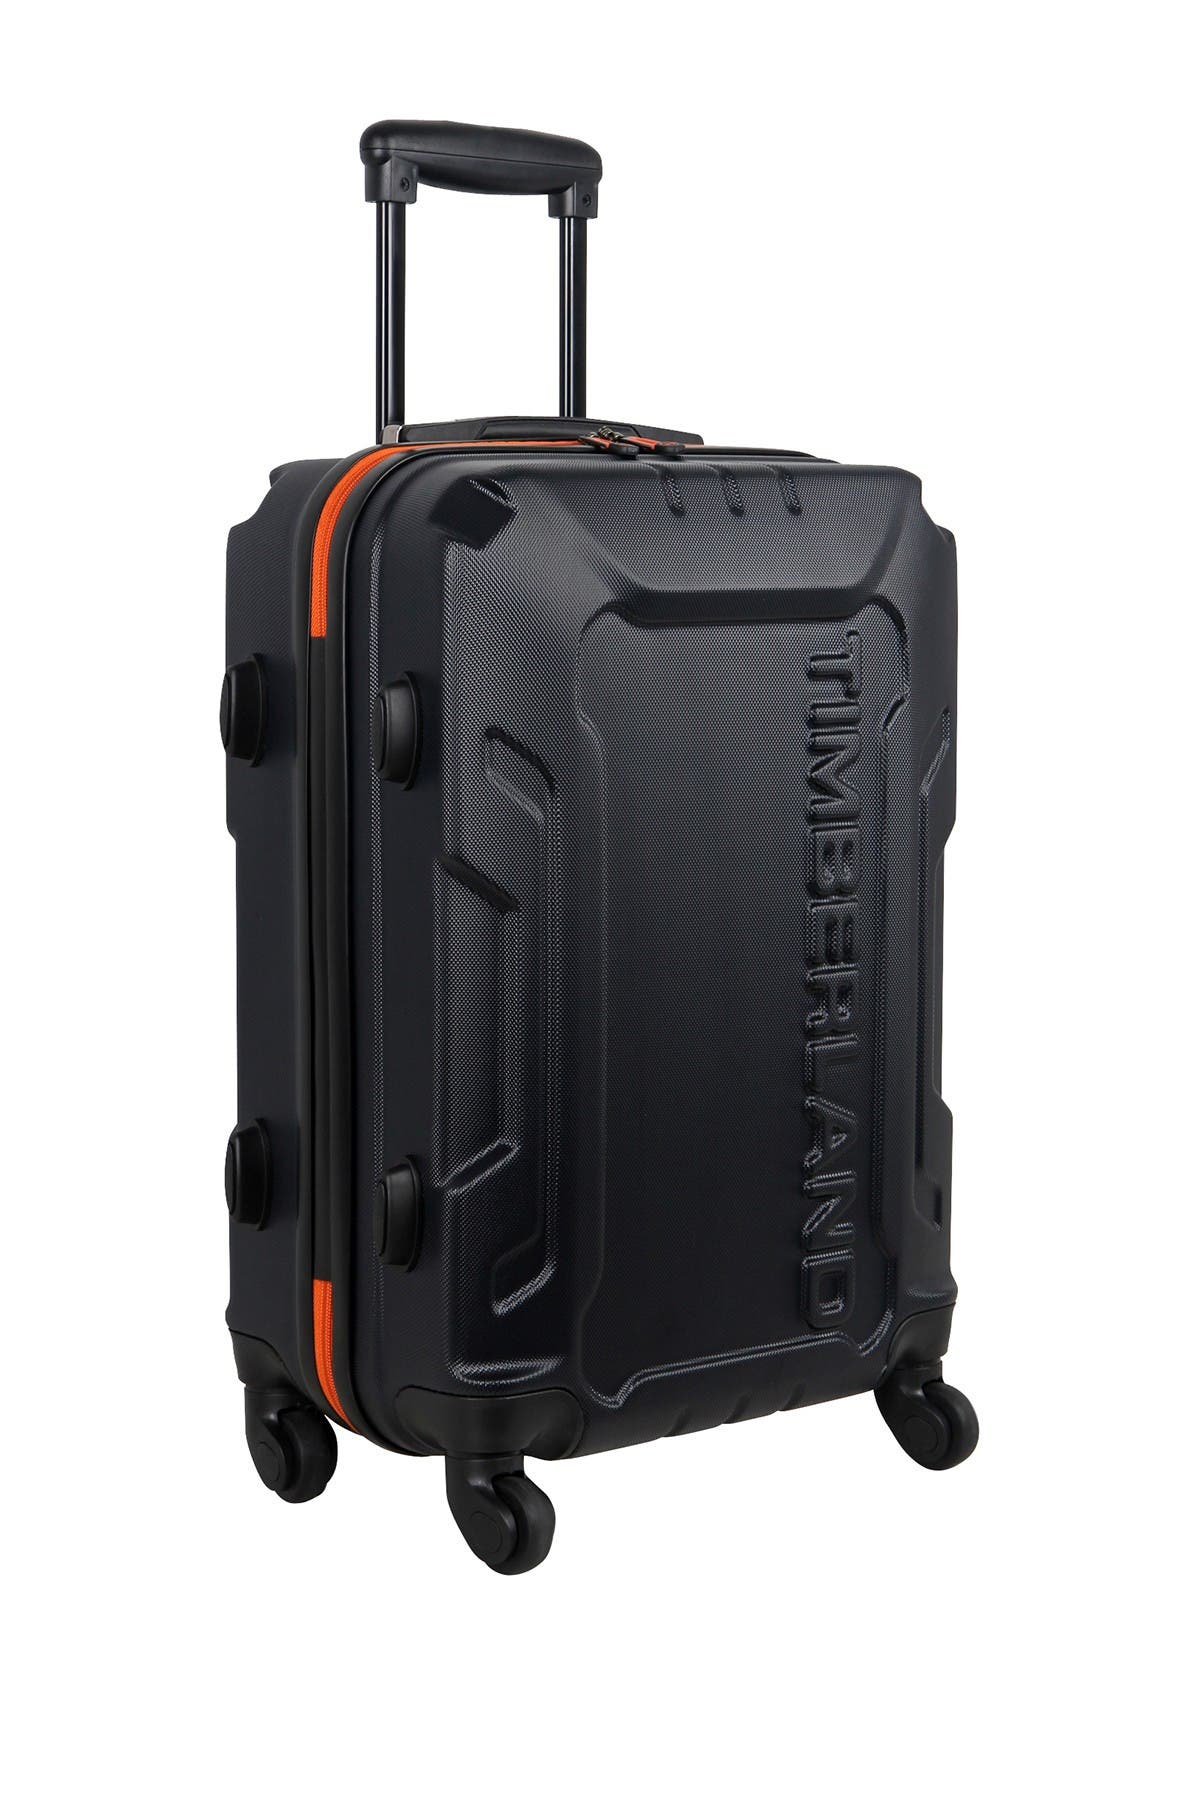 timberland carry on suitcase